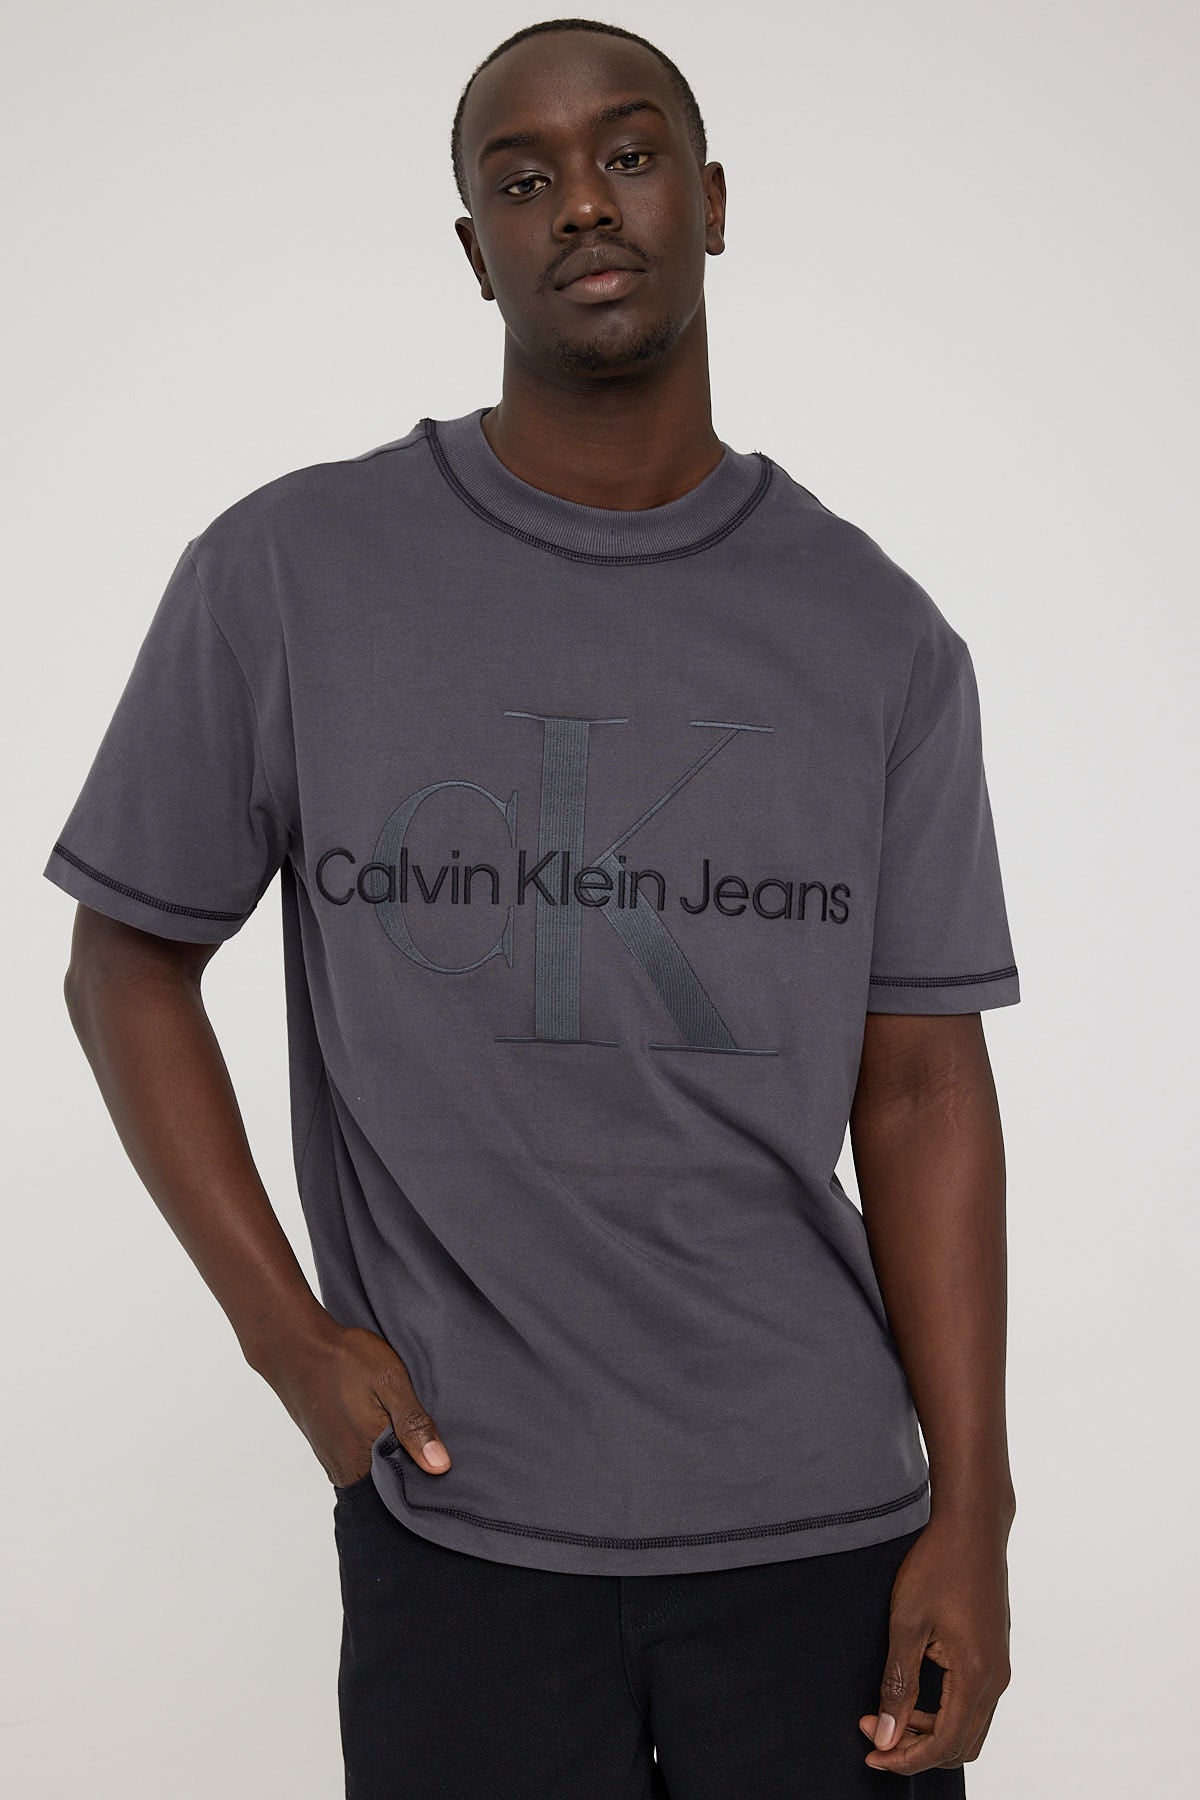 Calvin Klein Washed Monologue Tee Washed Black